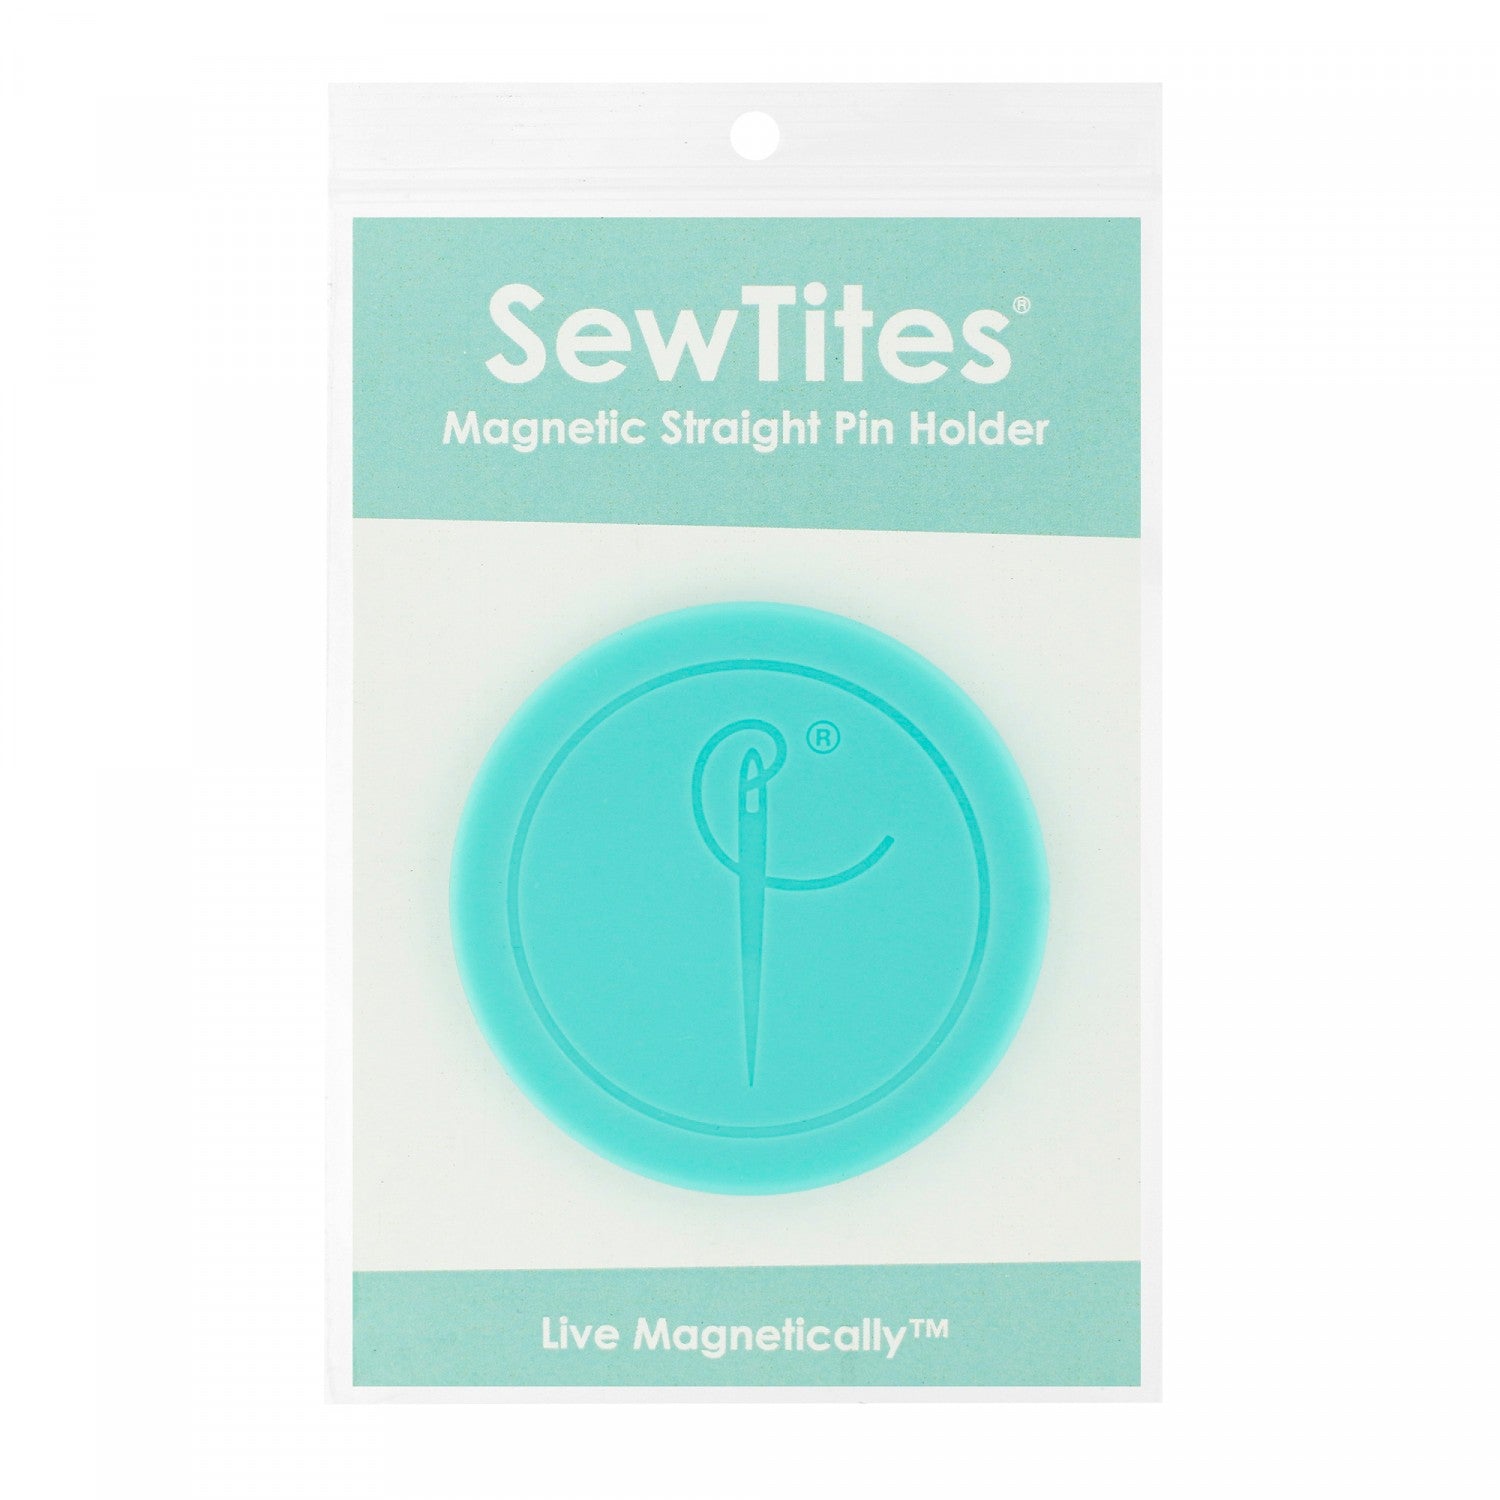 SewTites Magnetic Straight Pin Holder packaging